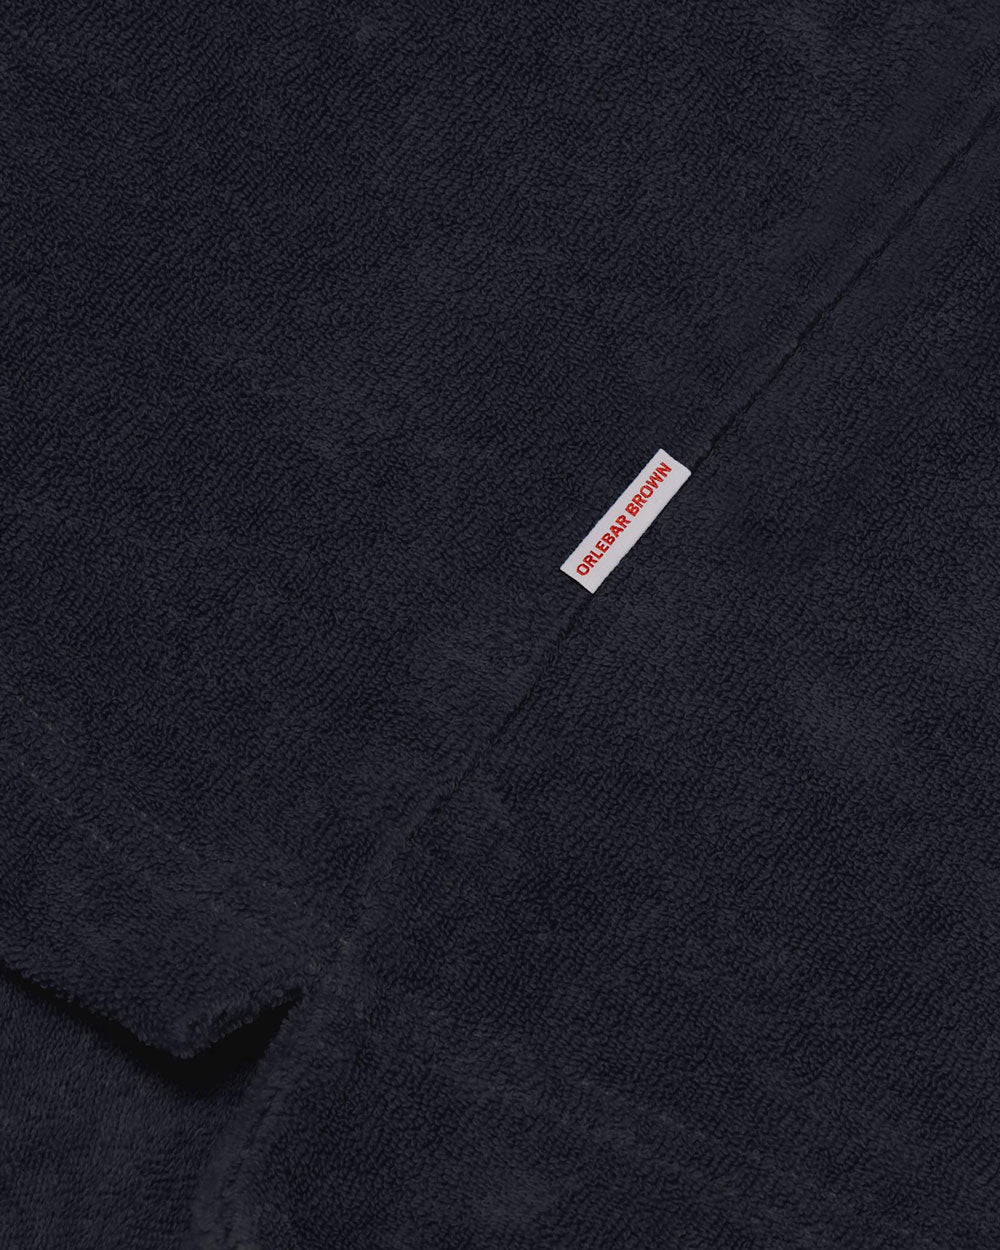 Terry Toweling Resort Polo Shirt in Navy